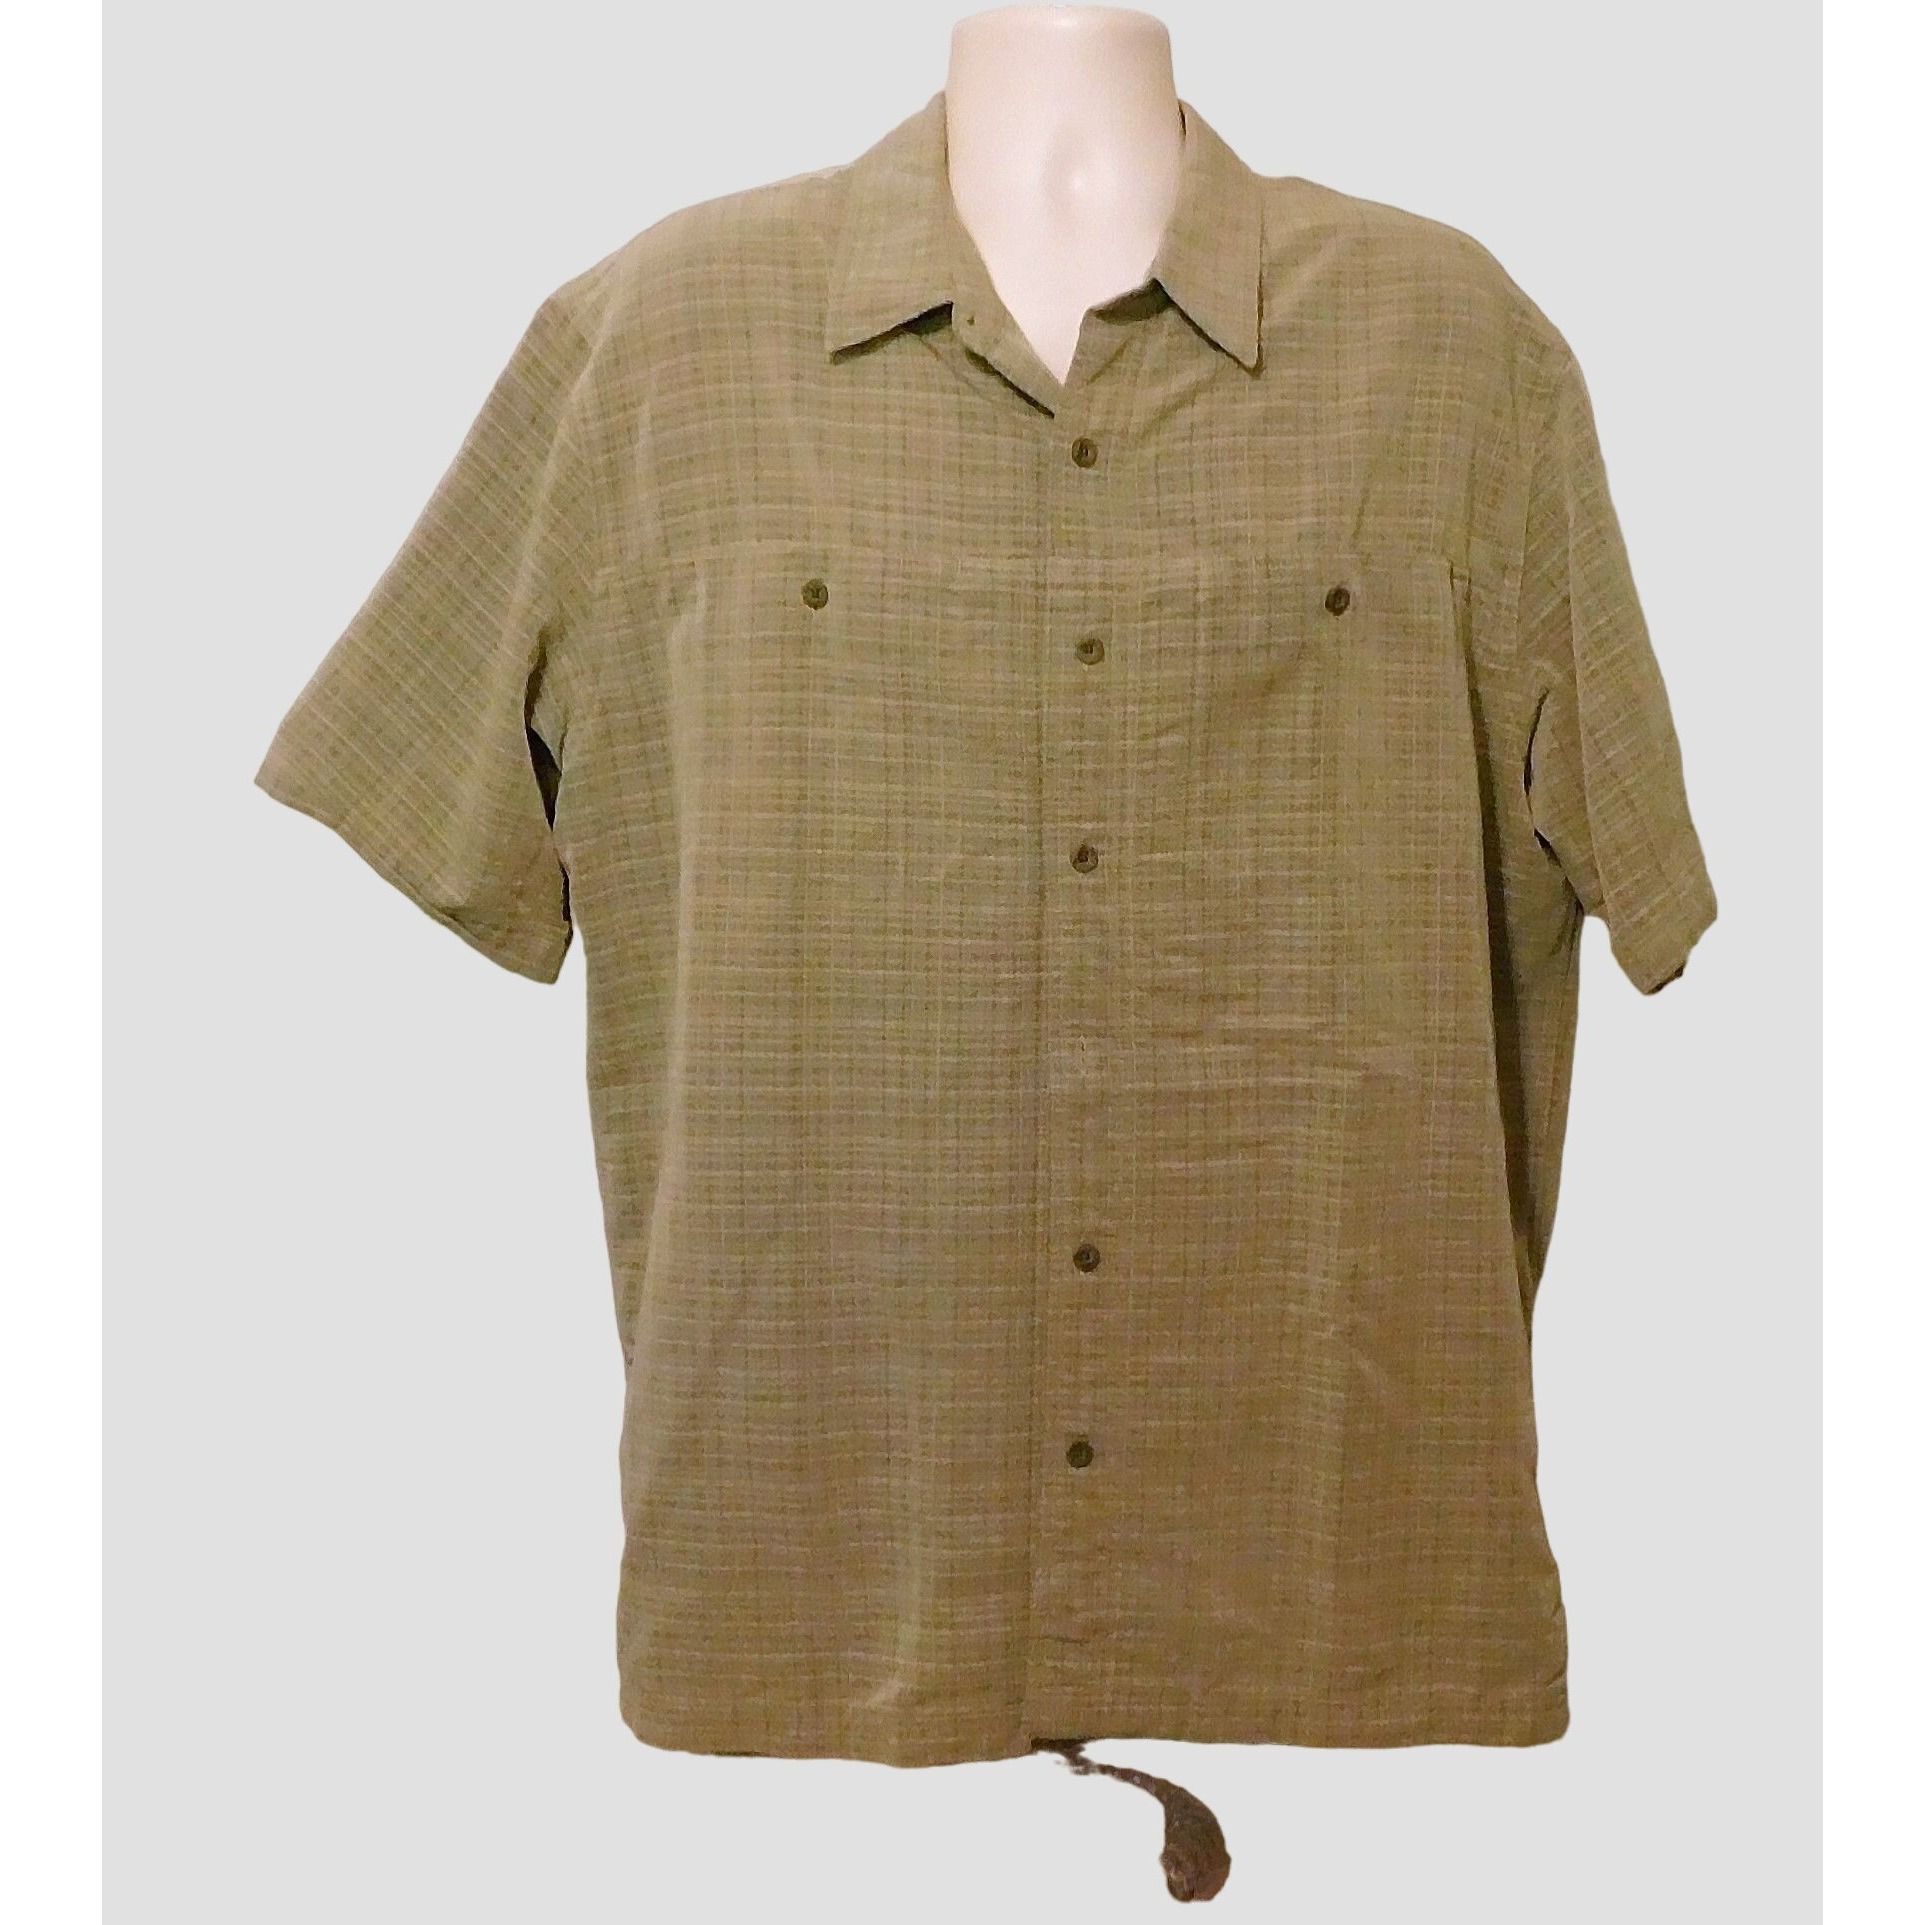 Other 5.11 Tactical Shirt XL Concealed Carry Green Plaid Short Slv Size US XL / EU 56 / 4 - 1 Preview